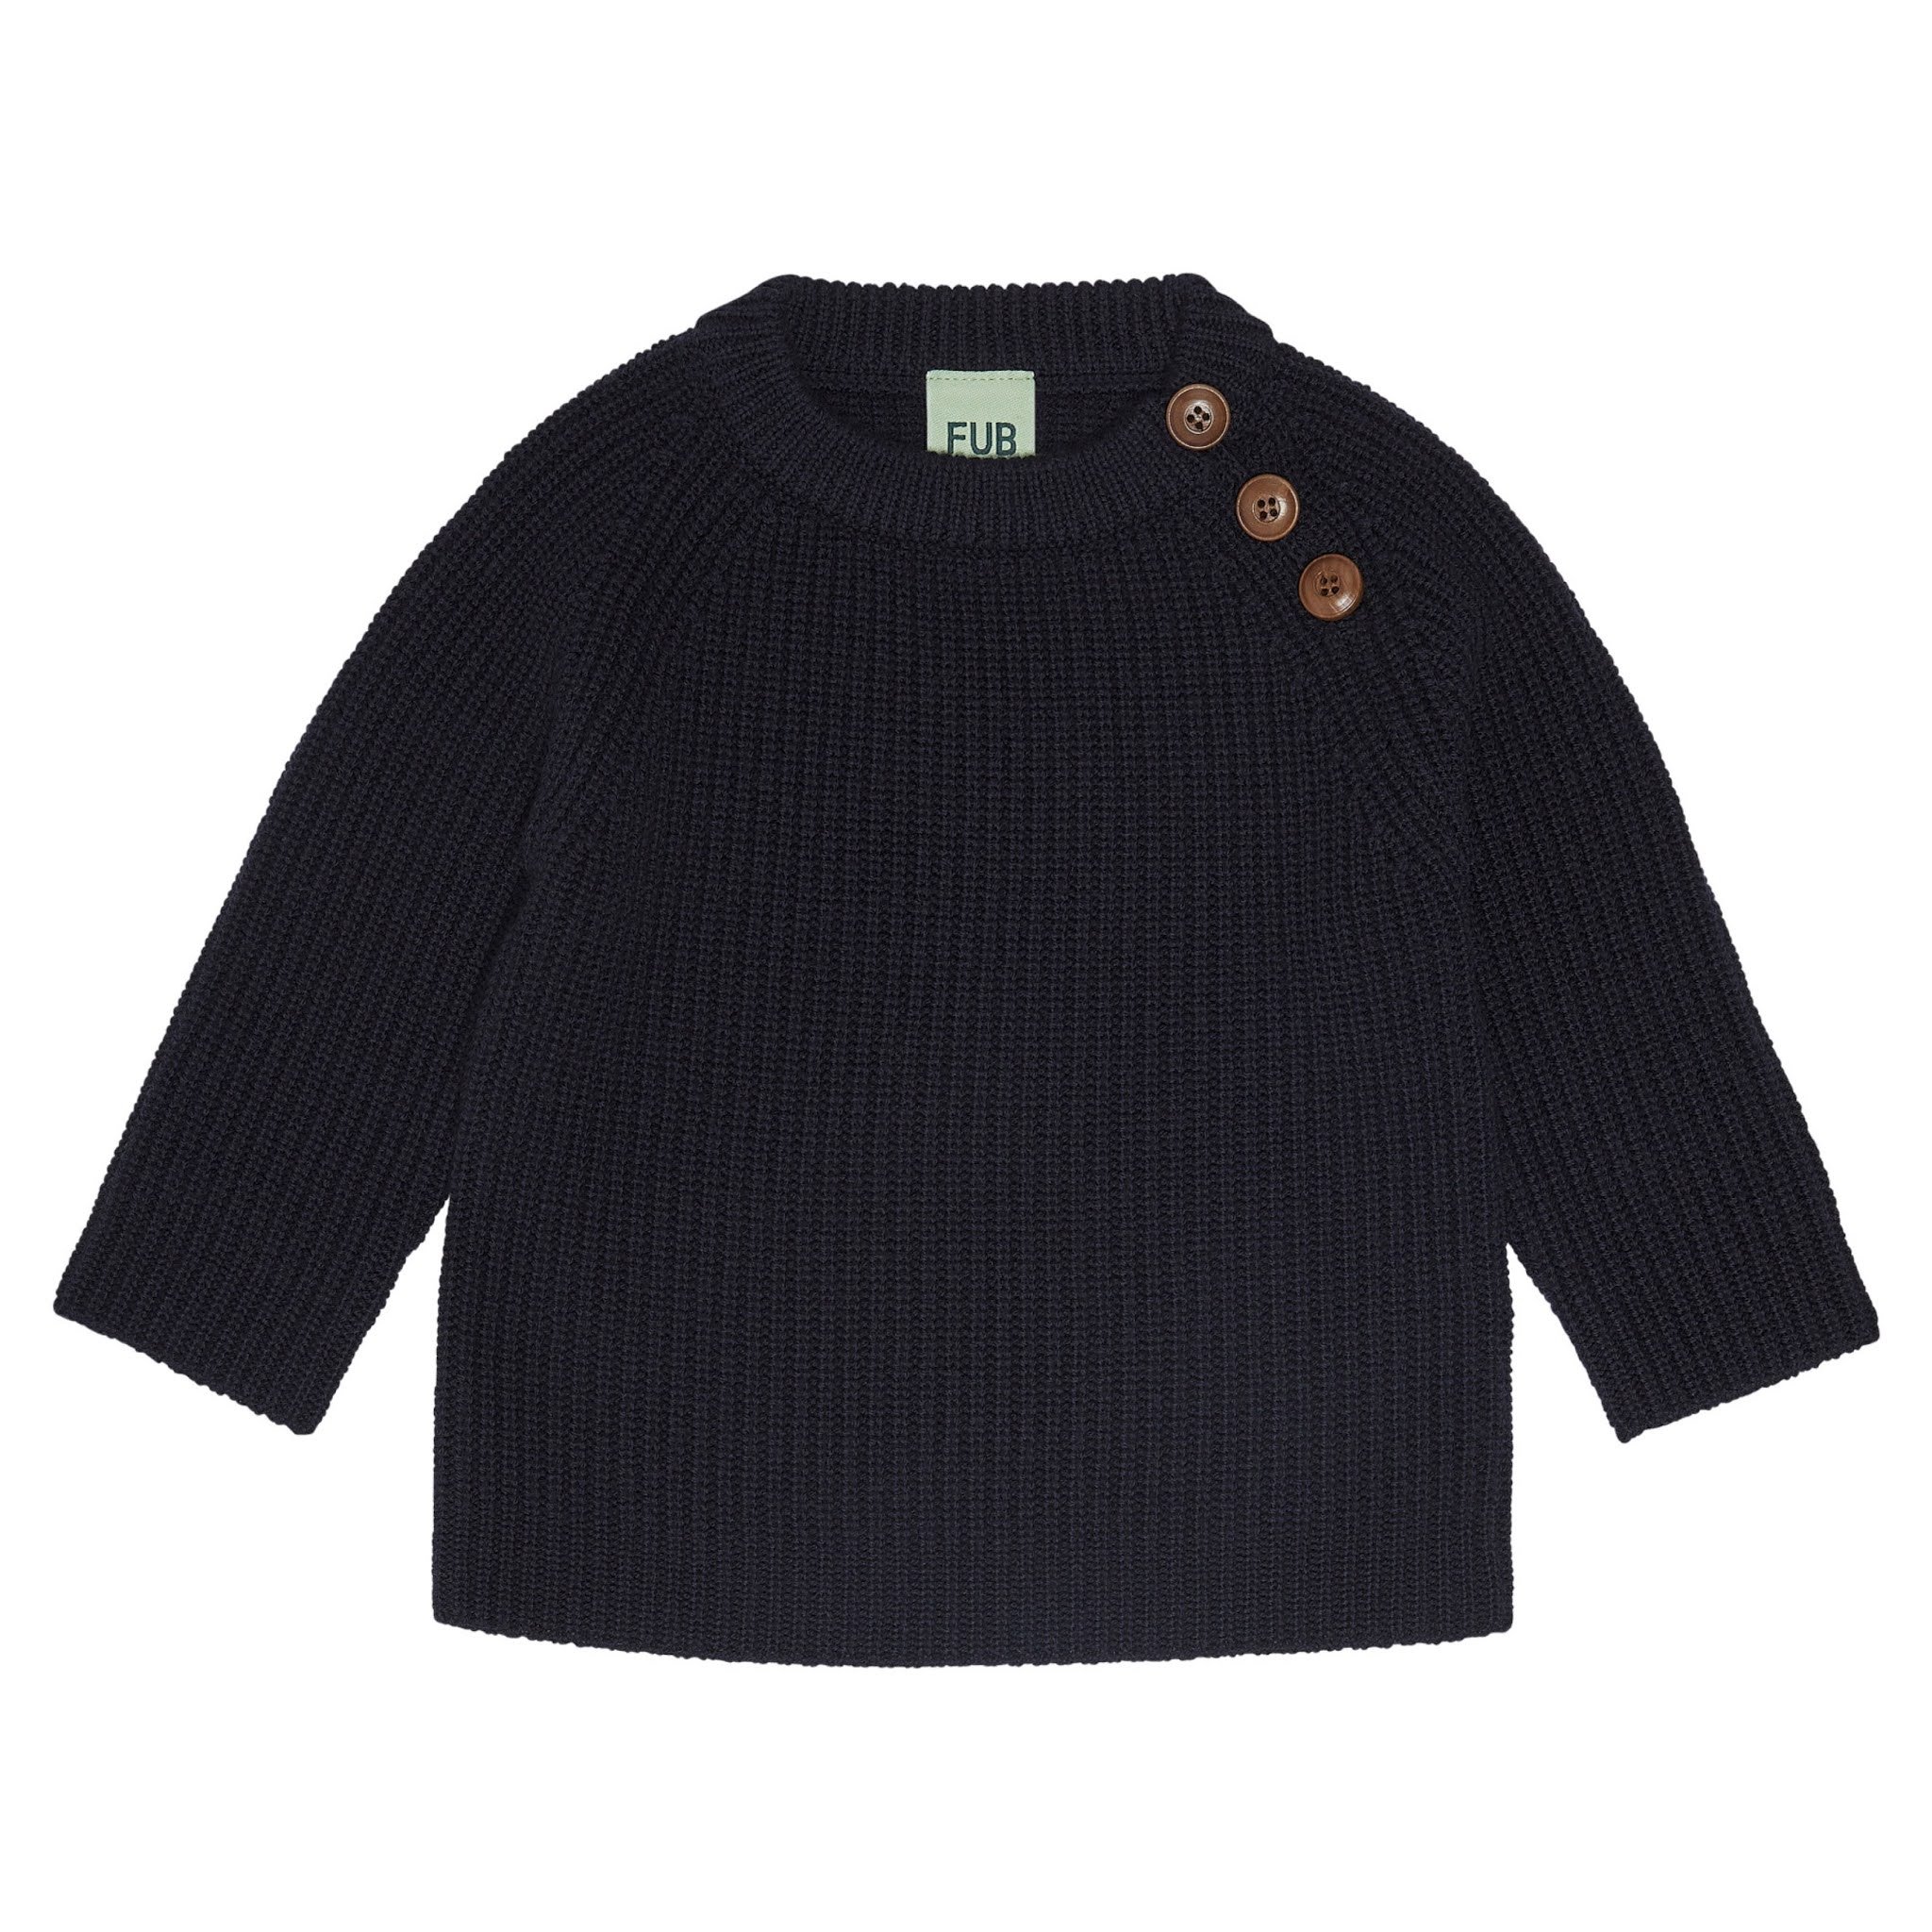 Baby Boy Navy Sweater from Fub